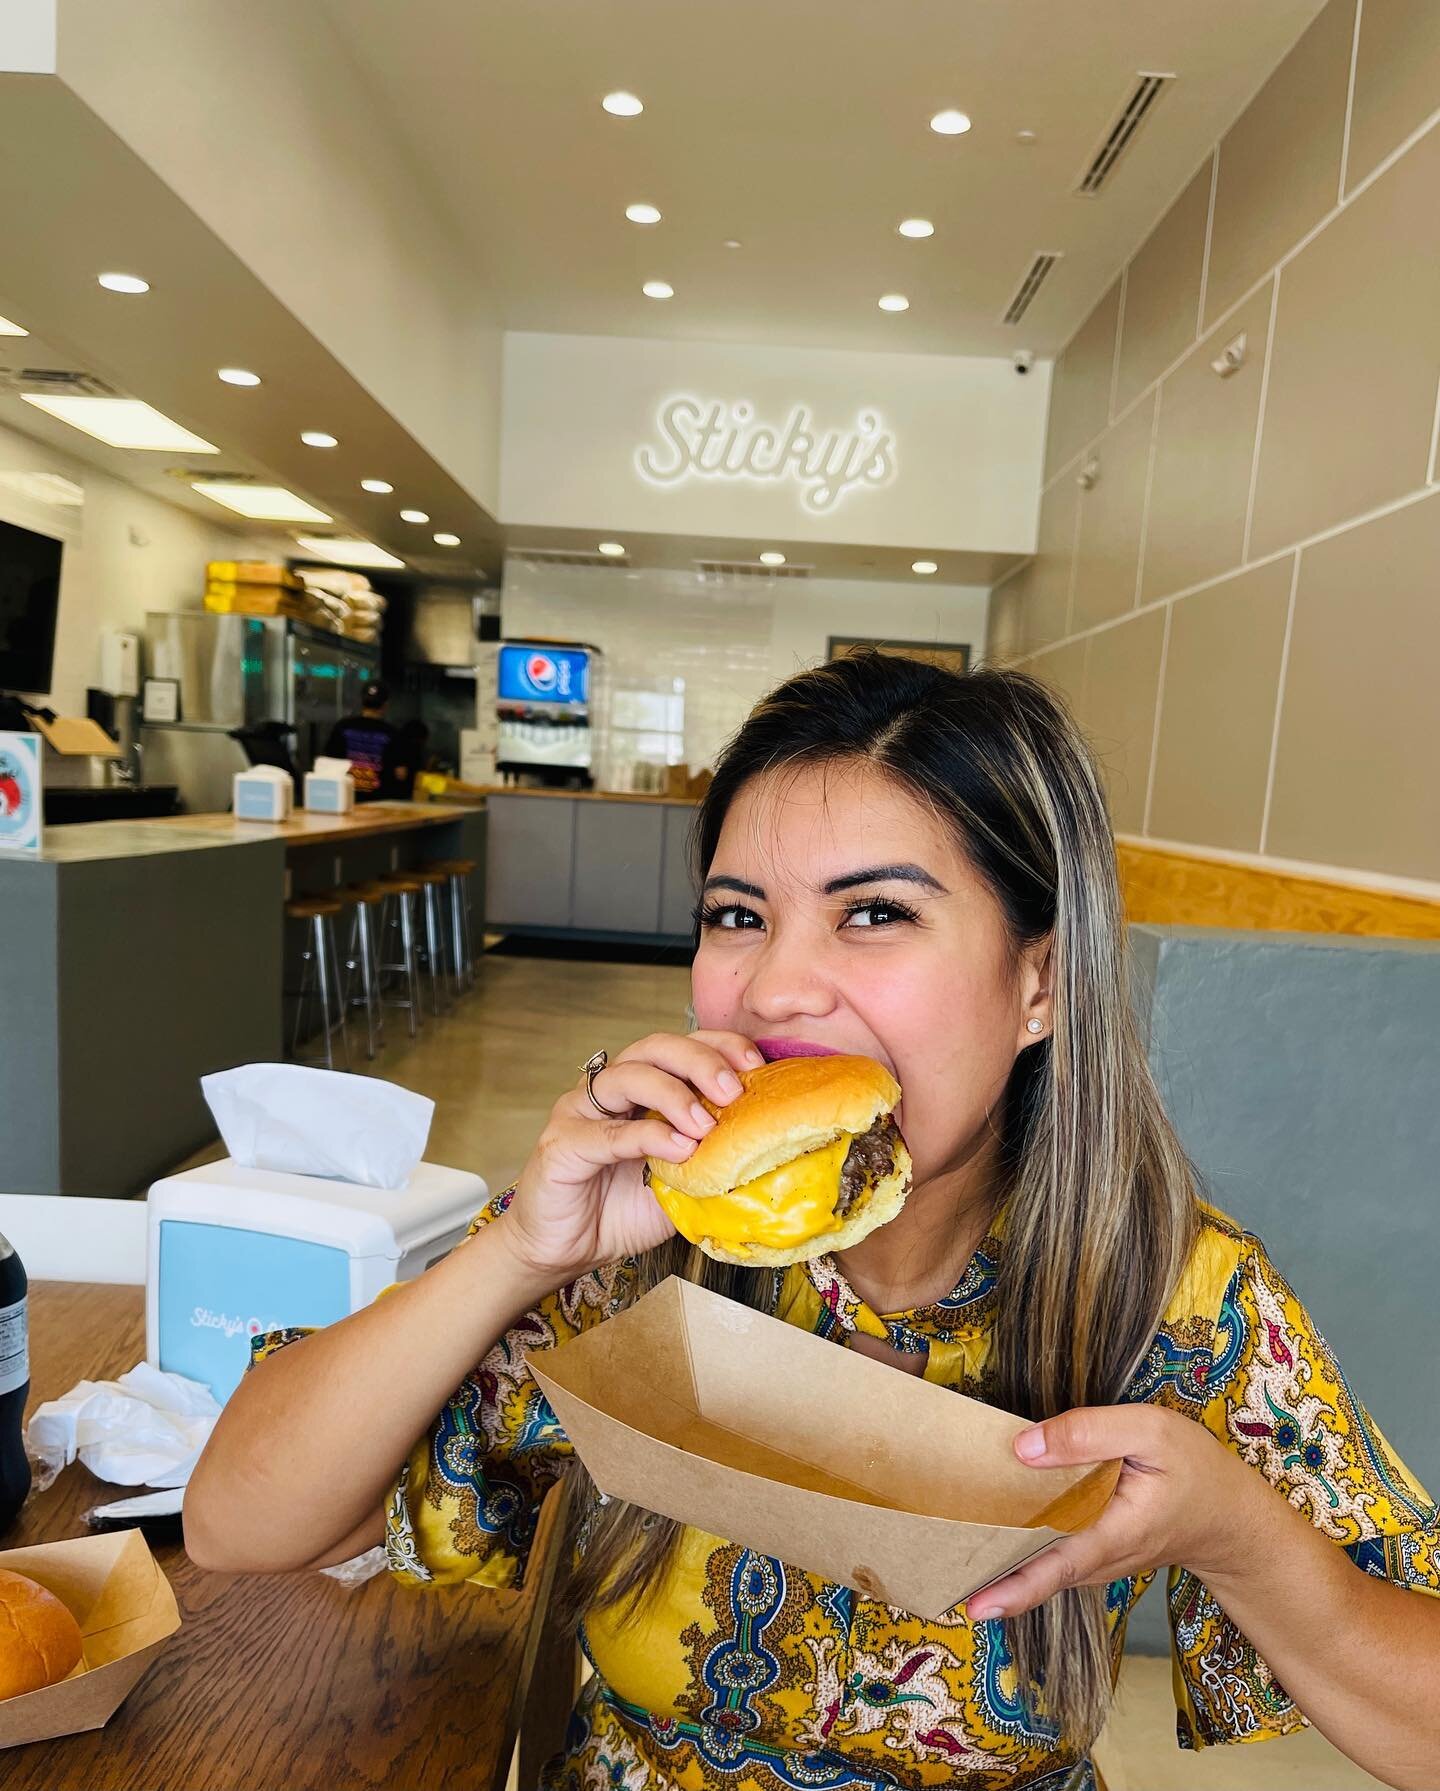 Kach Solo Travels in 2021 Trying the food at Sticky's Chicken (3).jpg